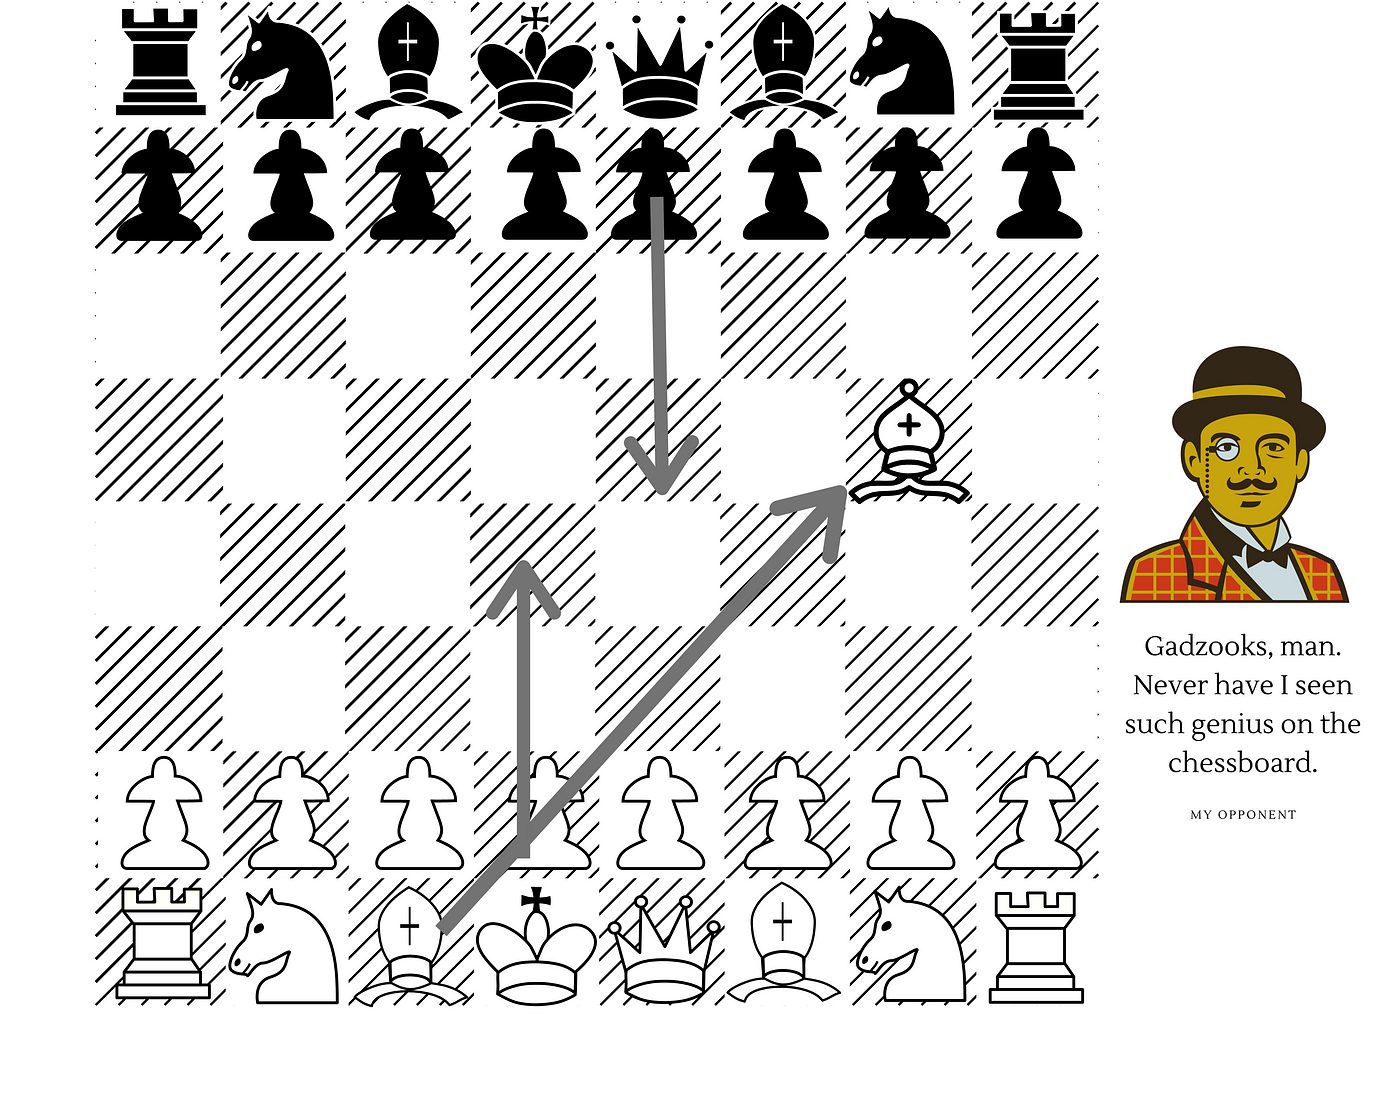 How to draw a chess game if you are losing - Quora